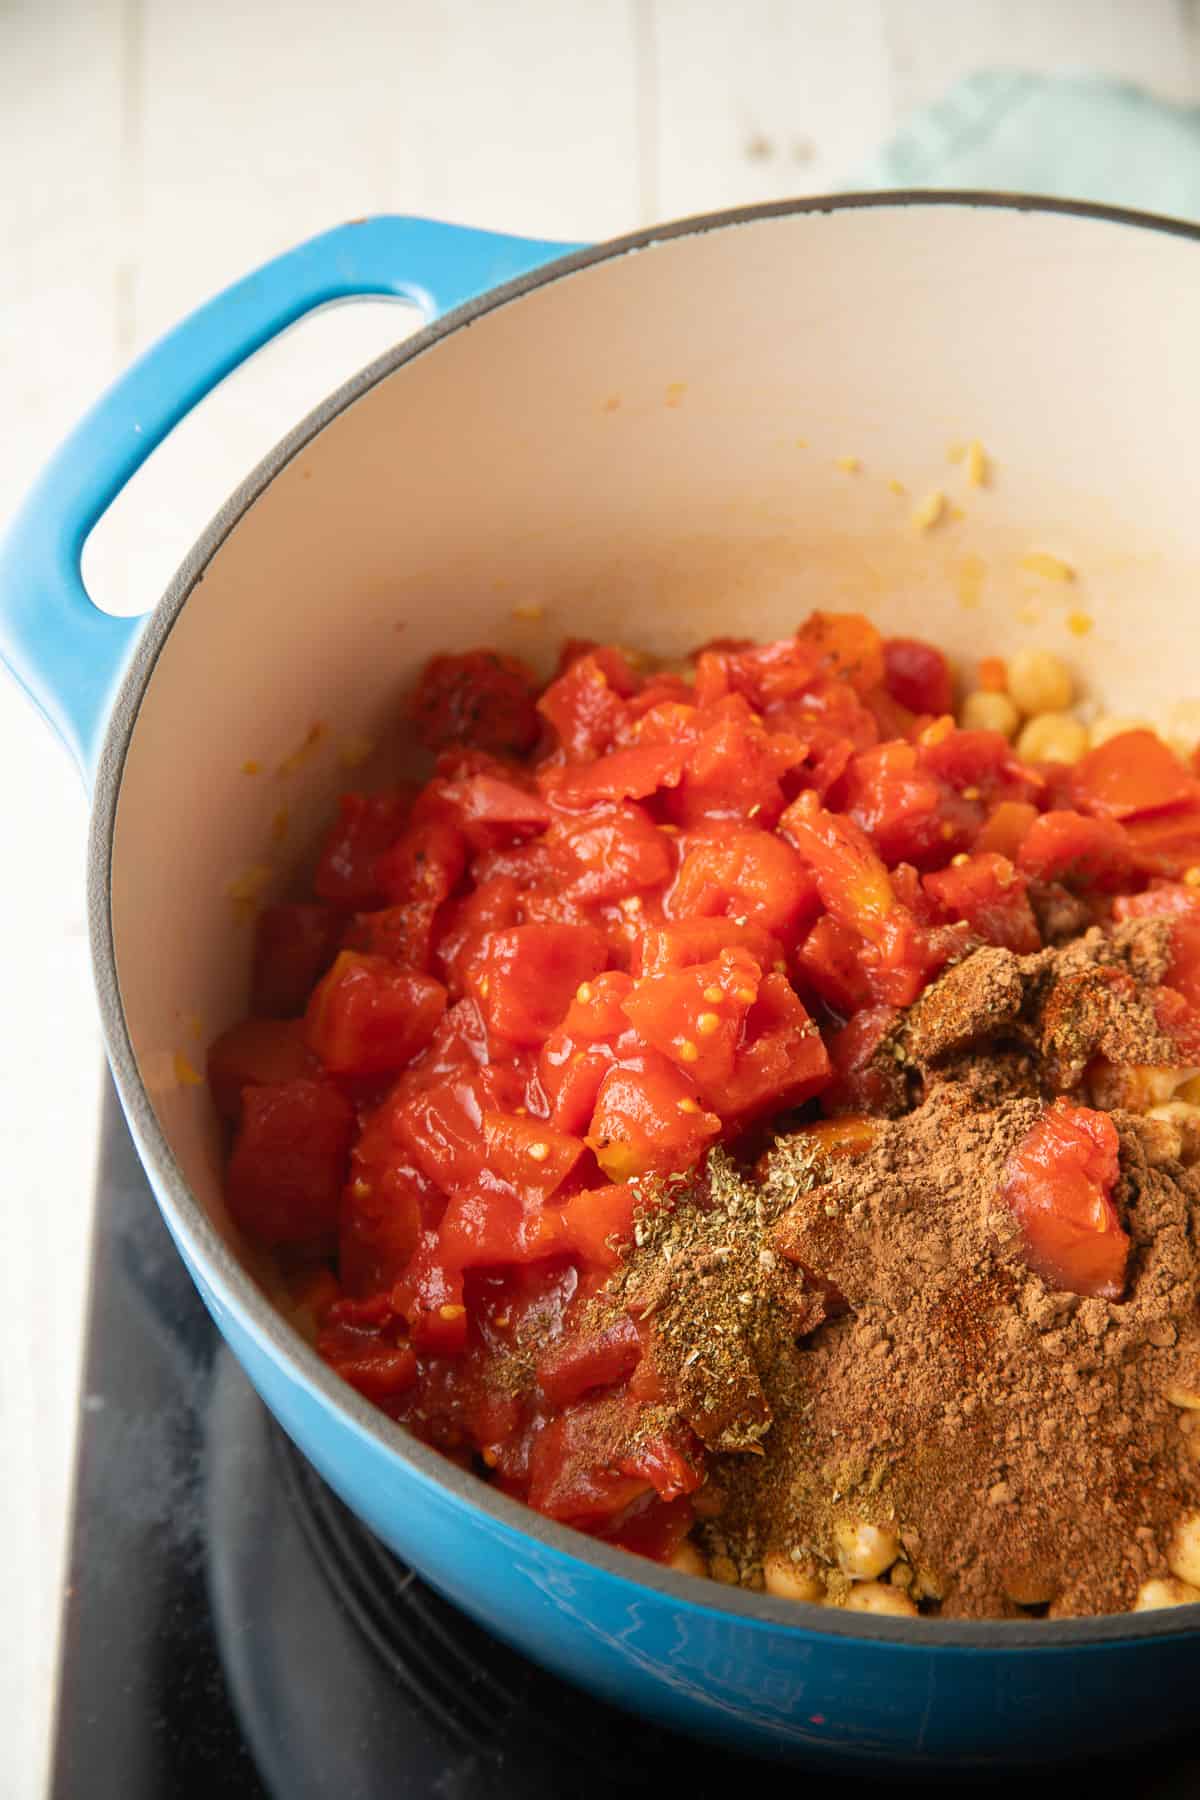 Spices, tomatoes and chickpeas in a pot.